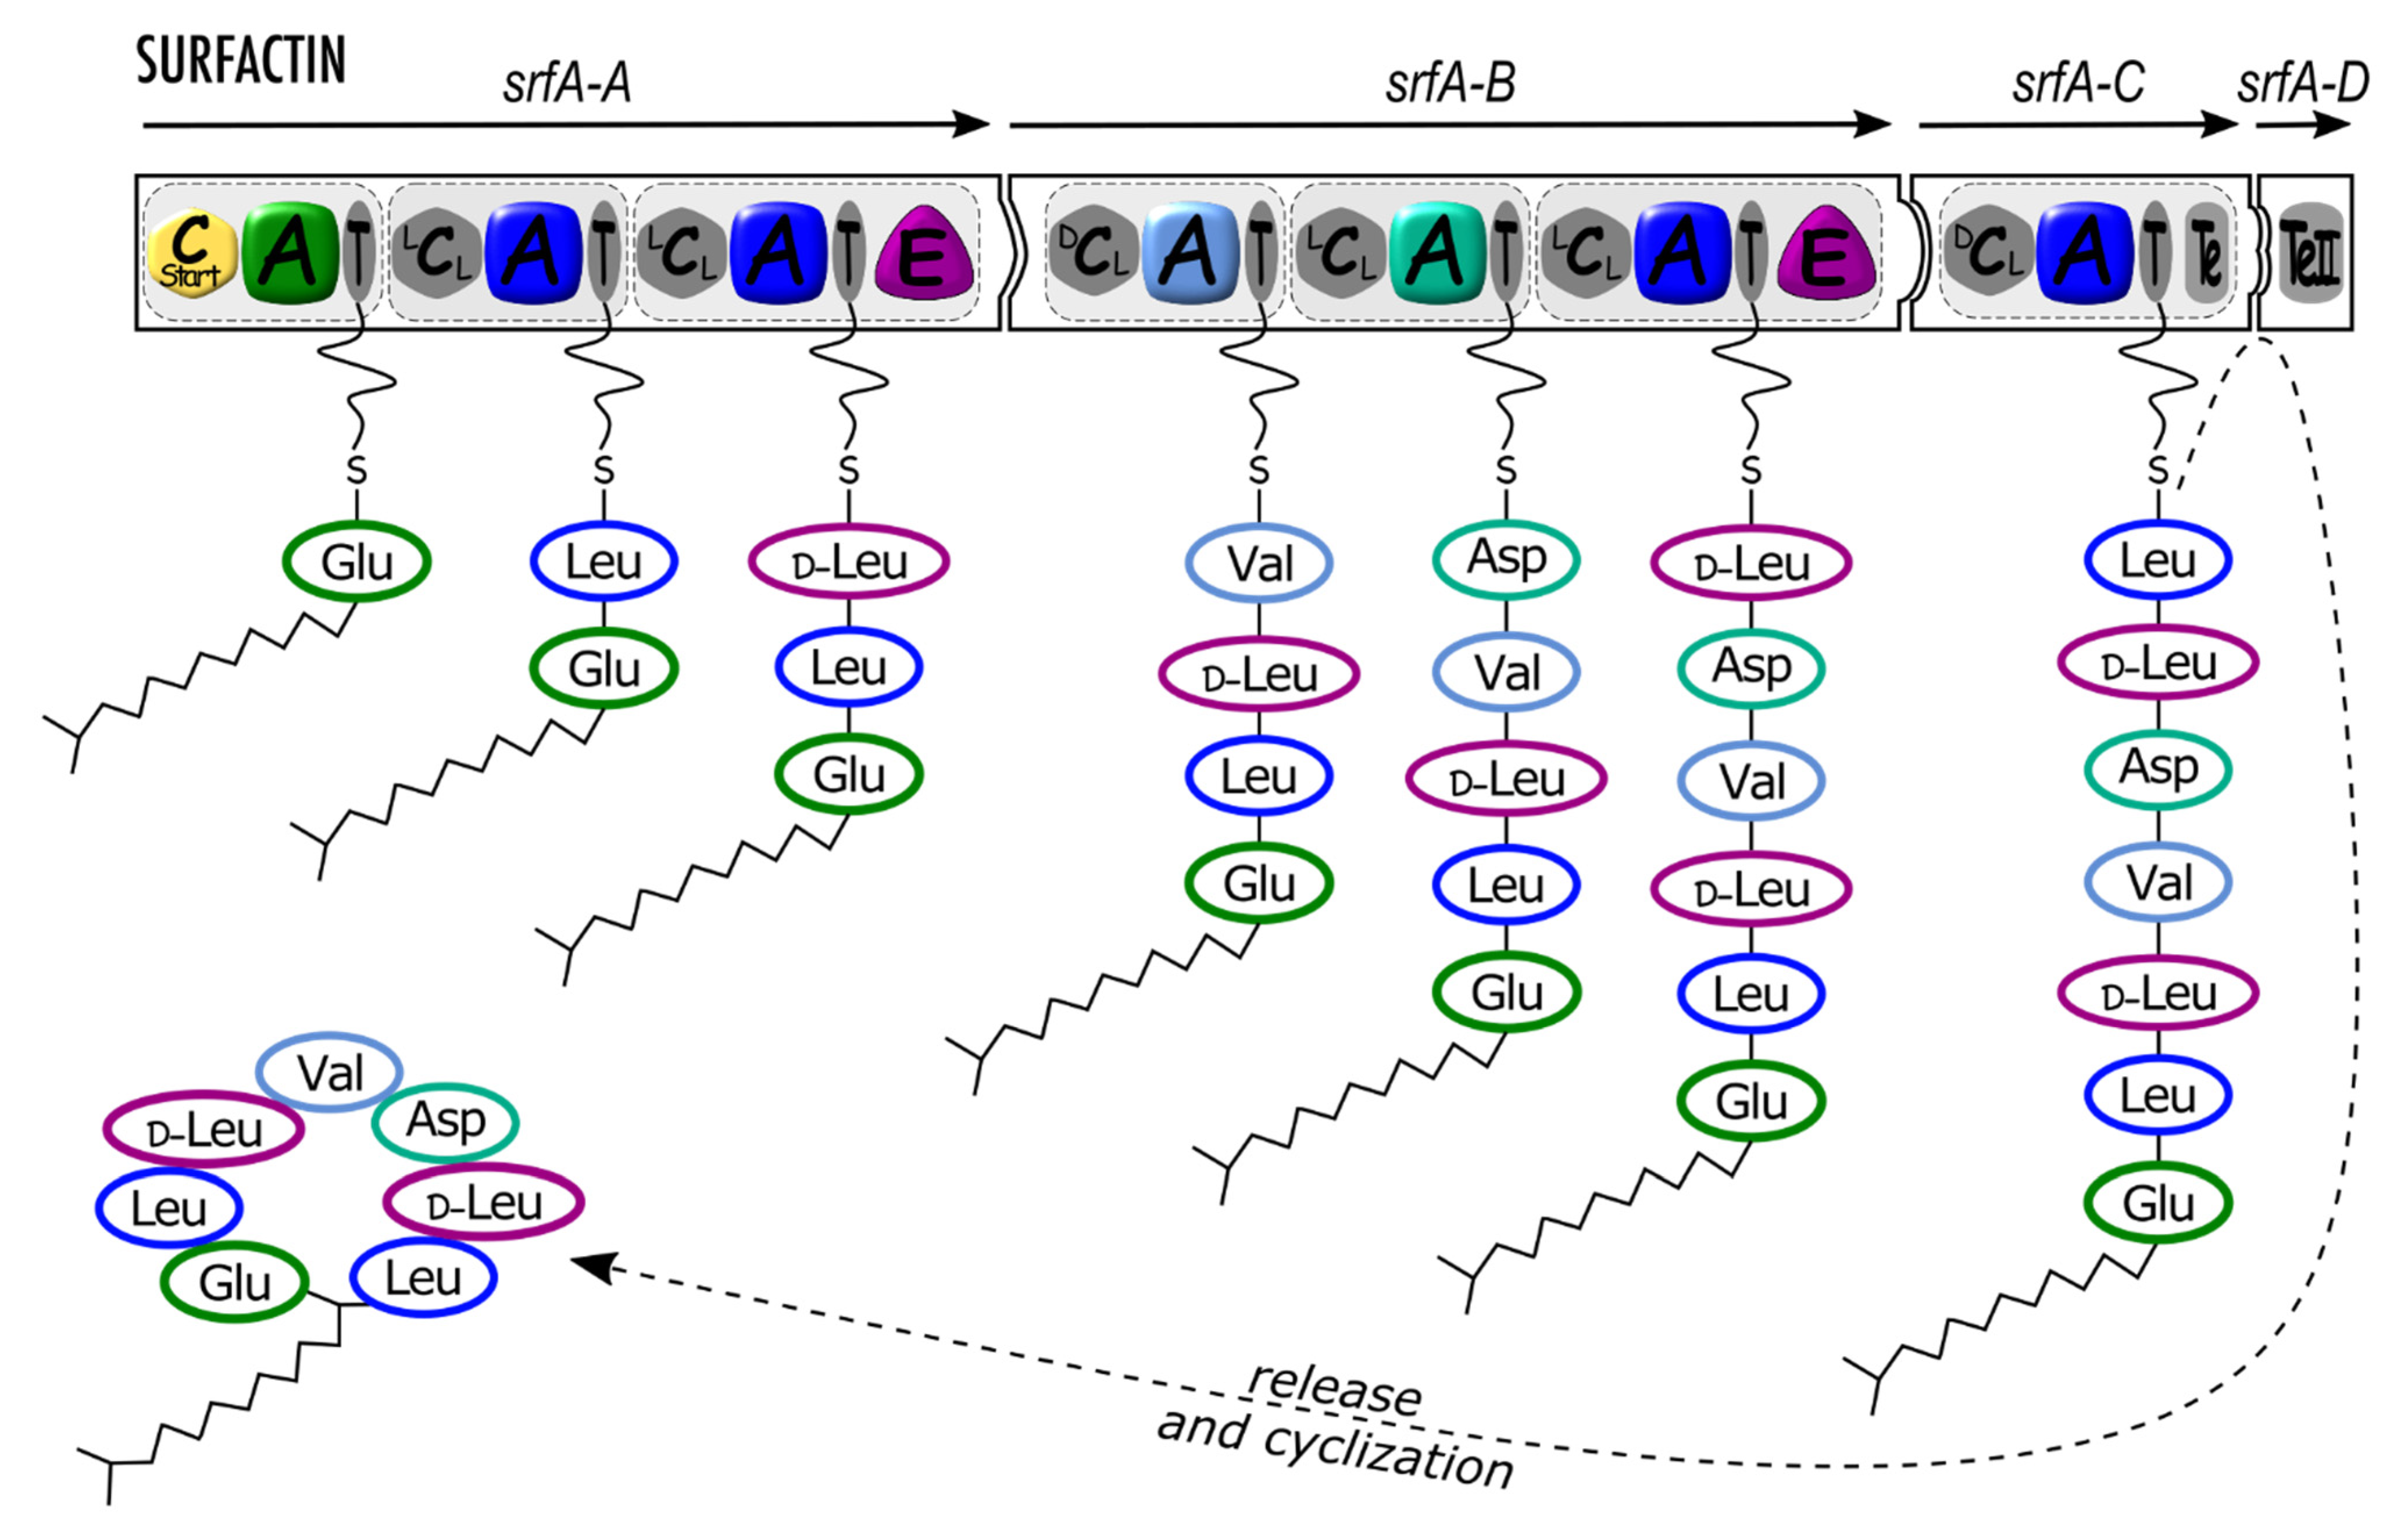 Subdomain dynamics enable chemical chain reactions in non-ribosomal peptide  synthetases